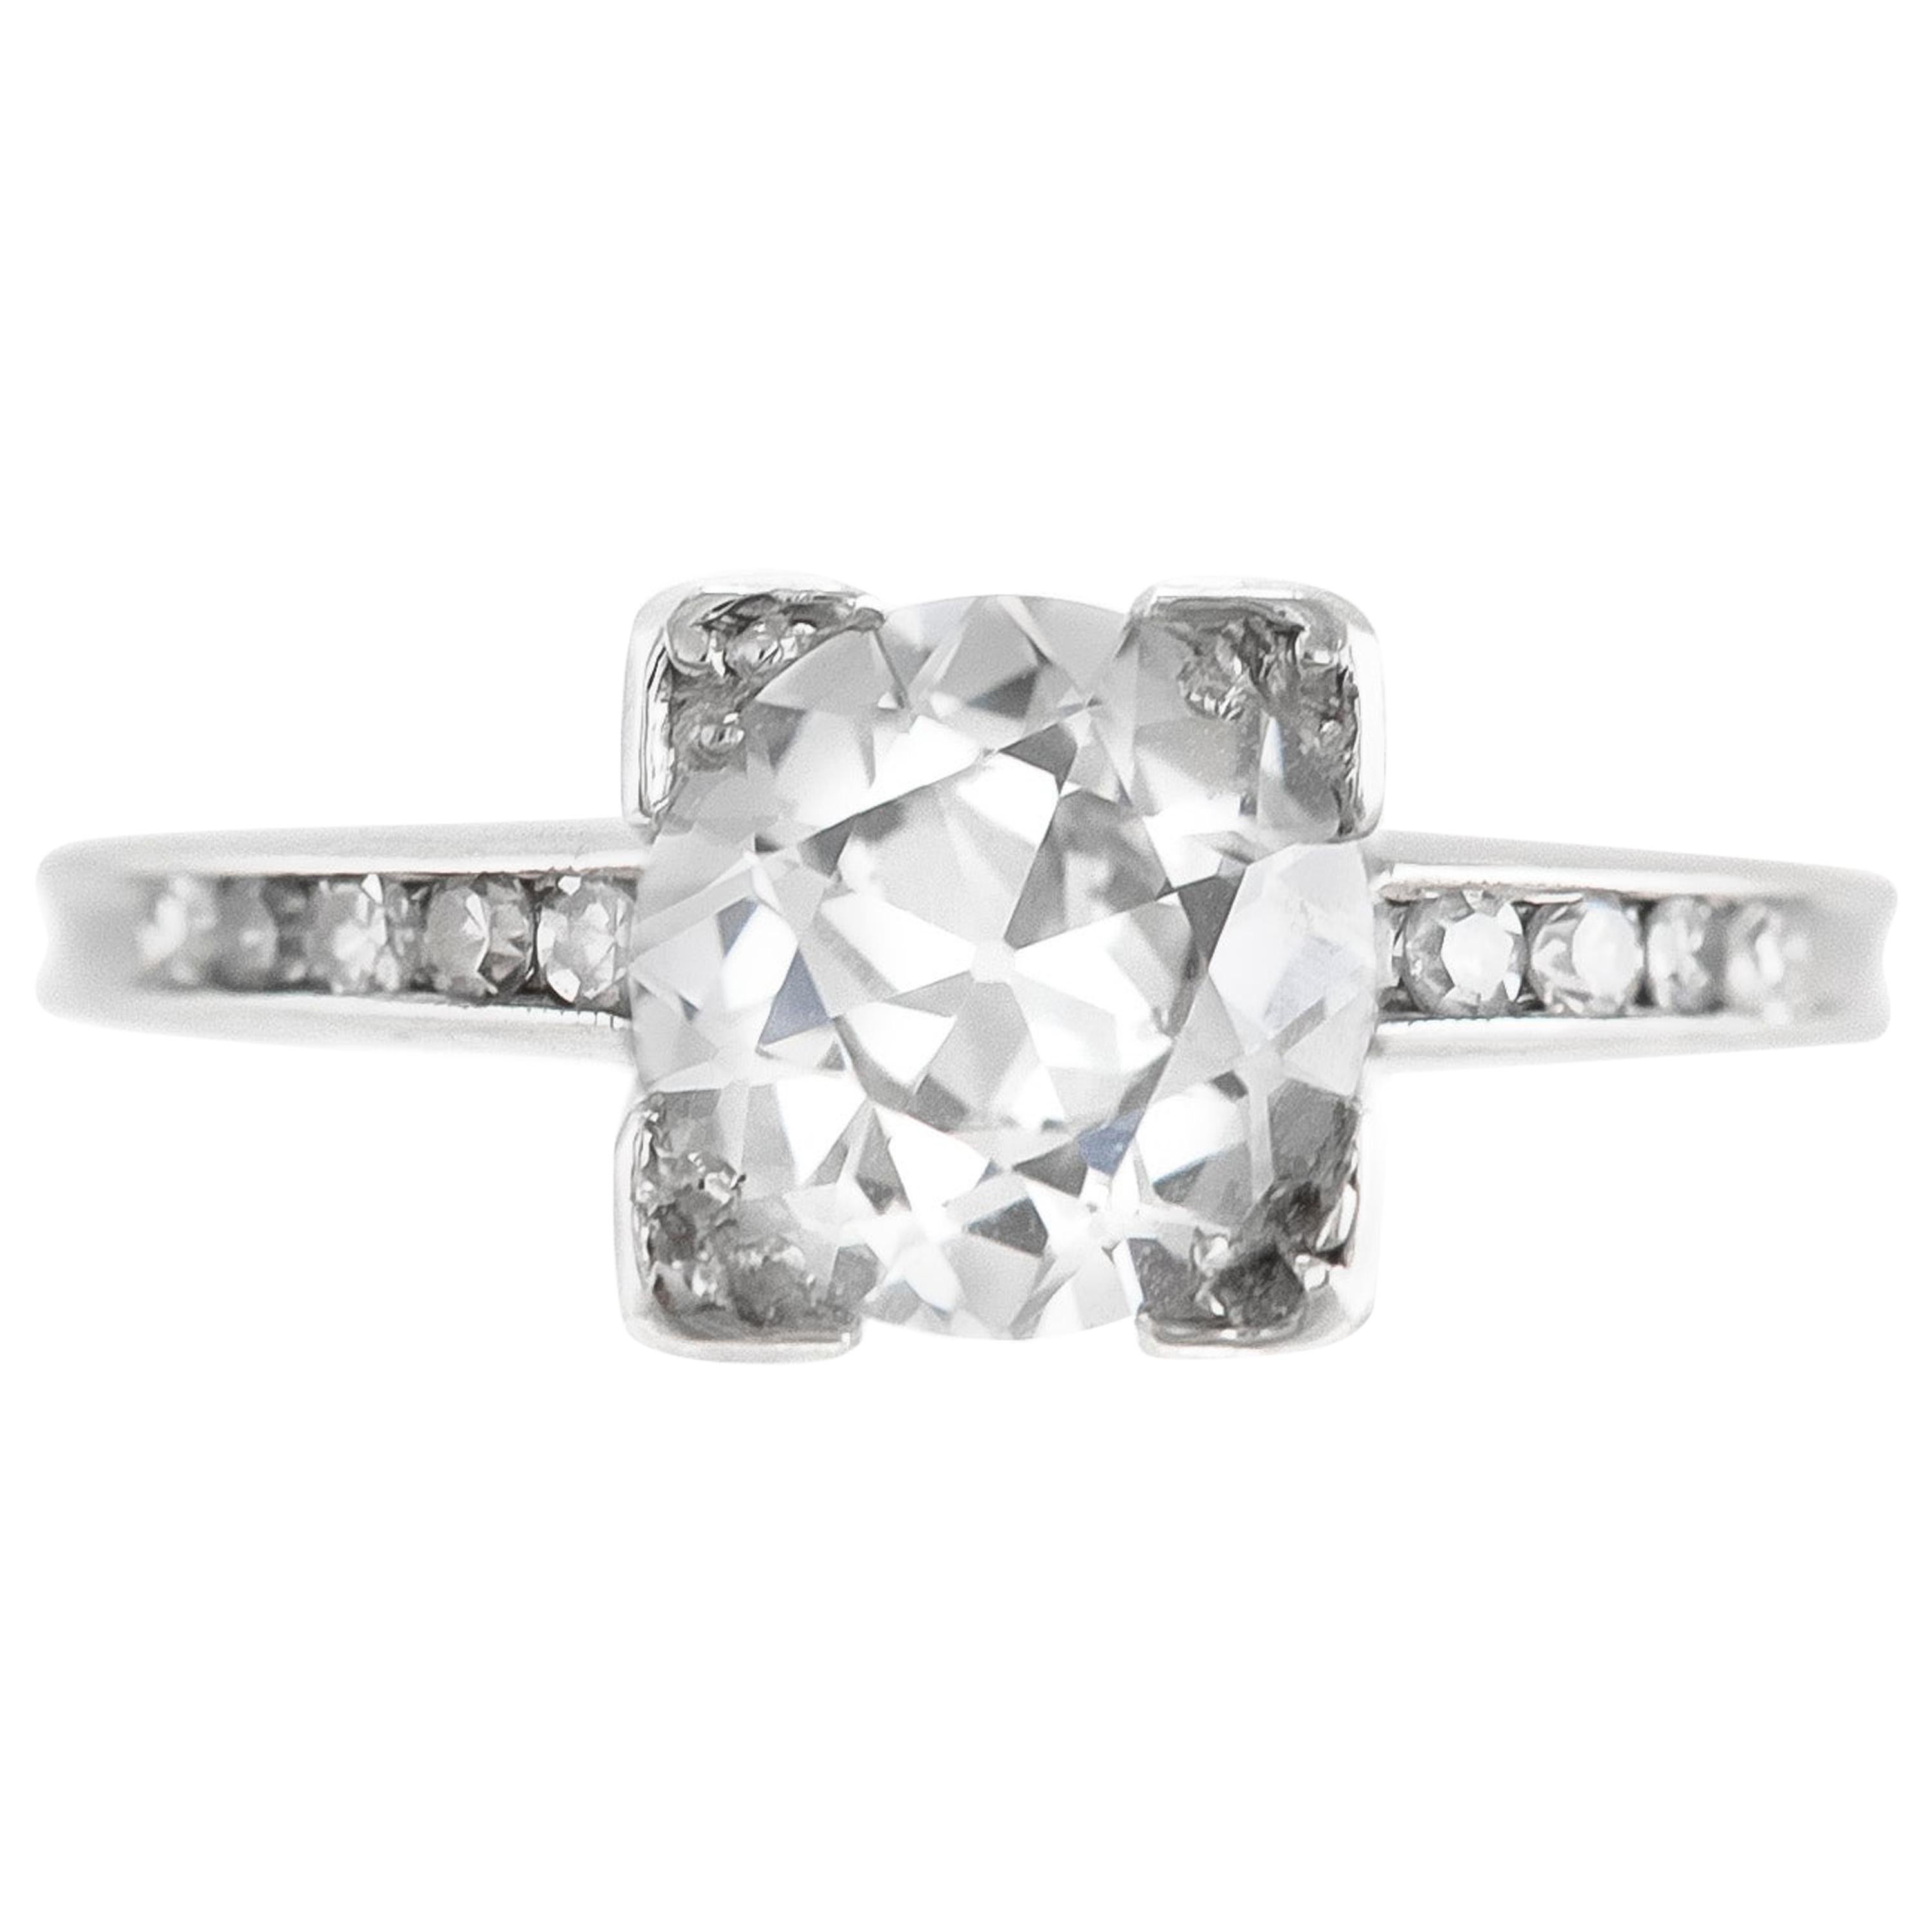 1930s Plat Engagement Ring with 1.07 Carat D VS2 For Sale